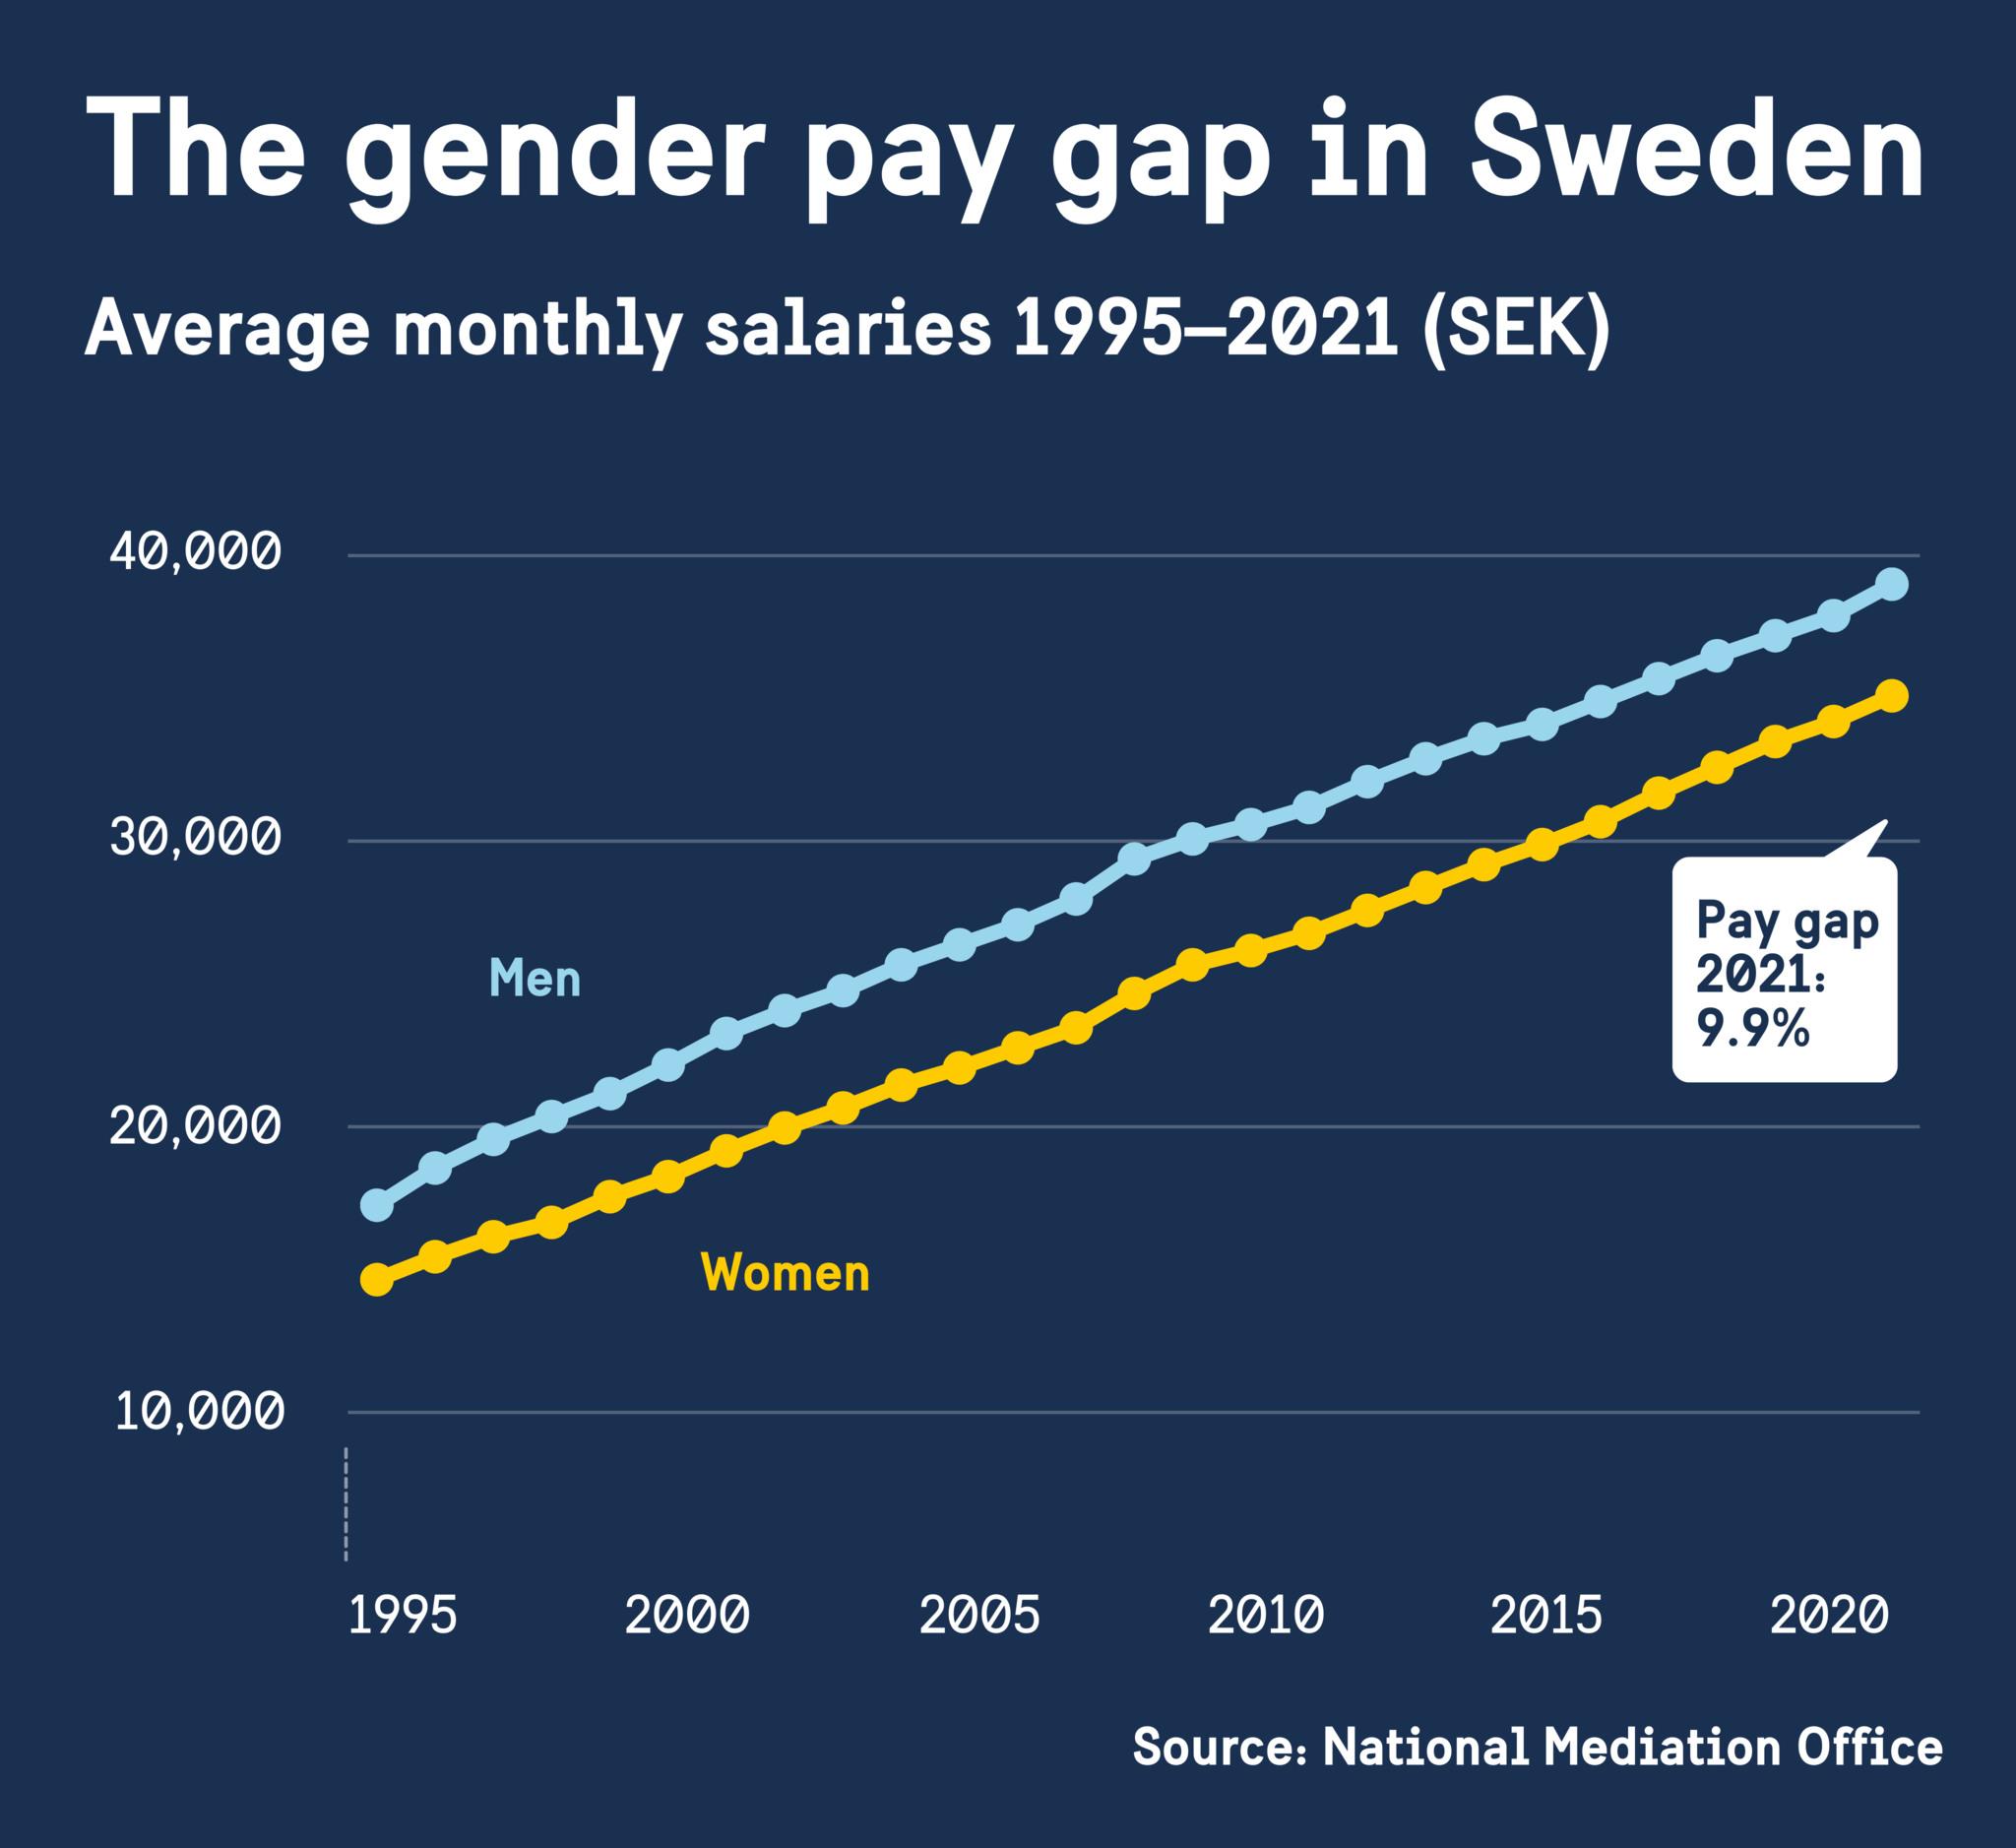 Chart showing the pay gap between men and women in Sweden 1995–2021.